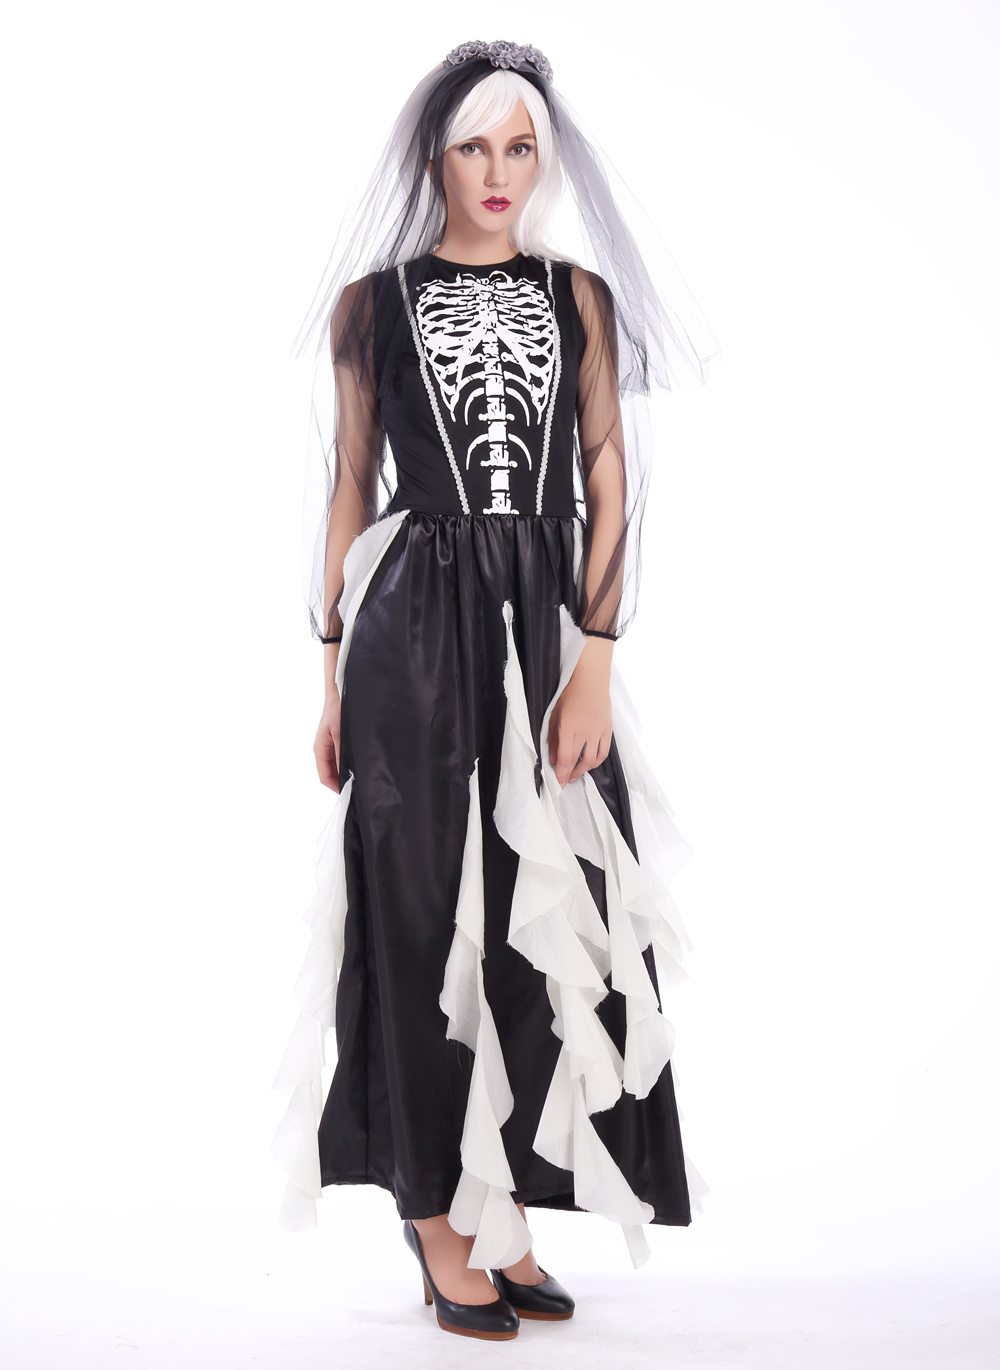 F1680 black and white zombie bride skeleton costume,it comes with headwear,dress